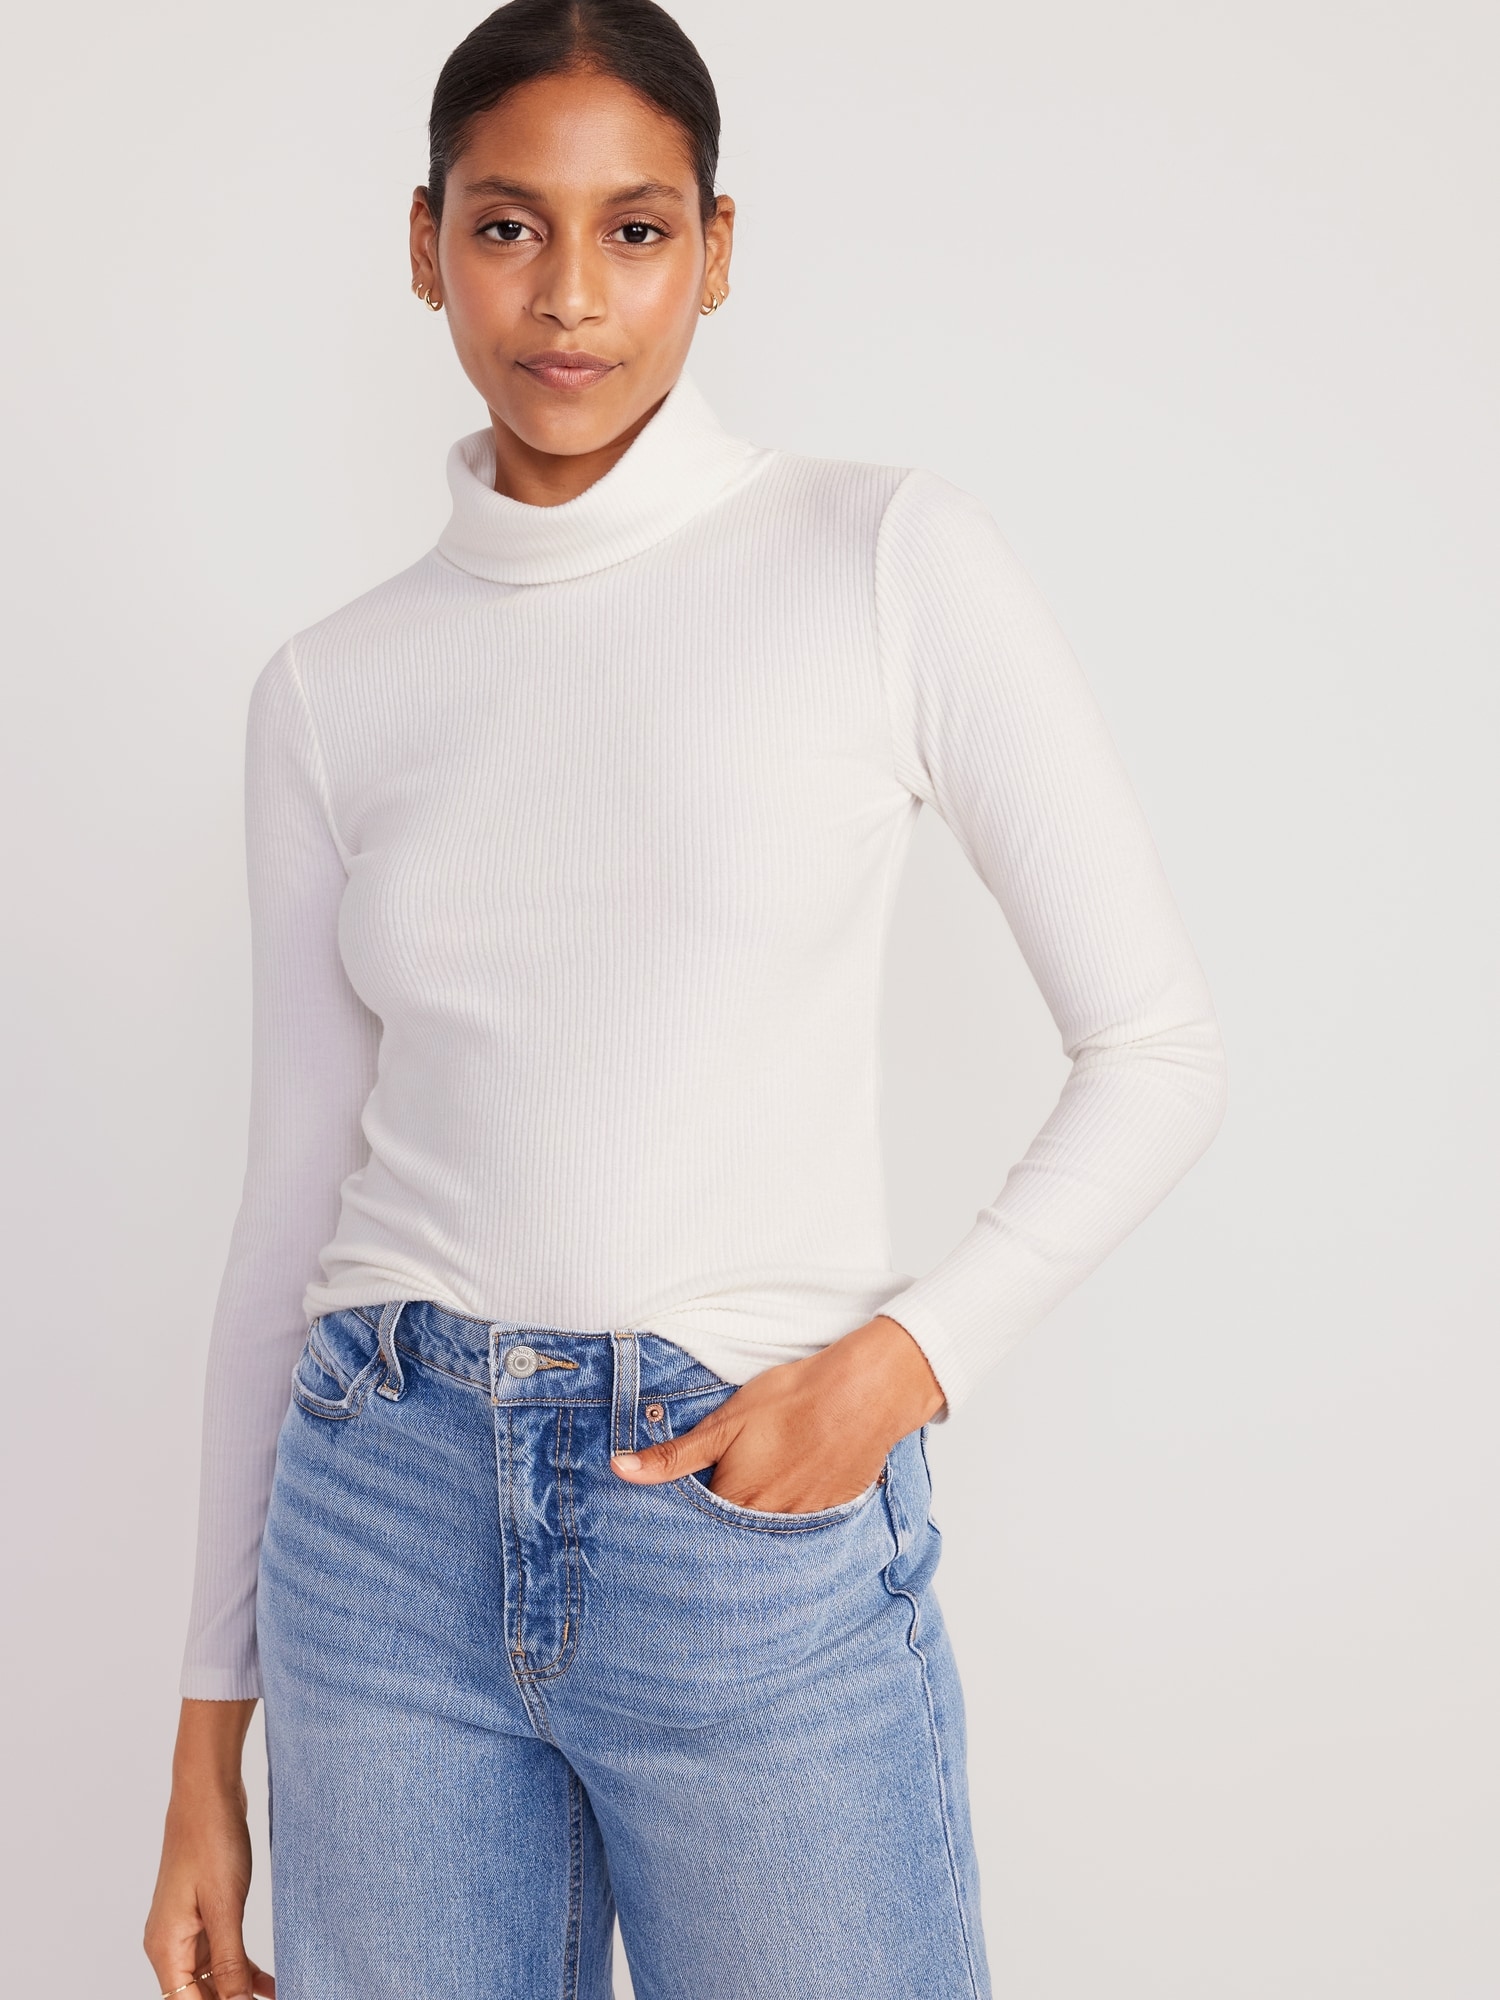 Fitted Plush Rib-Knit Turtleneck for Women